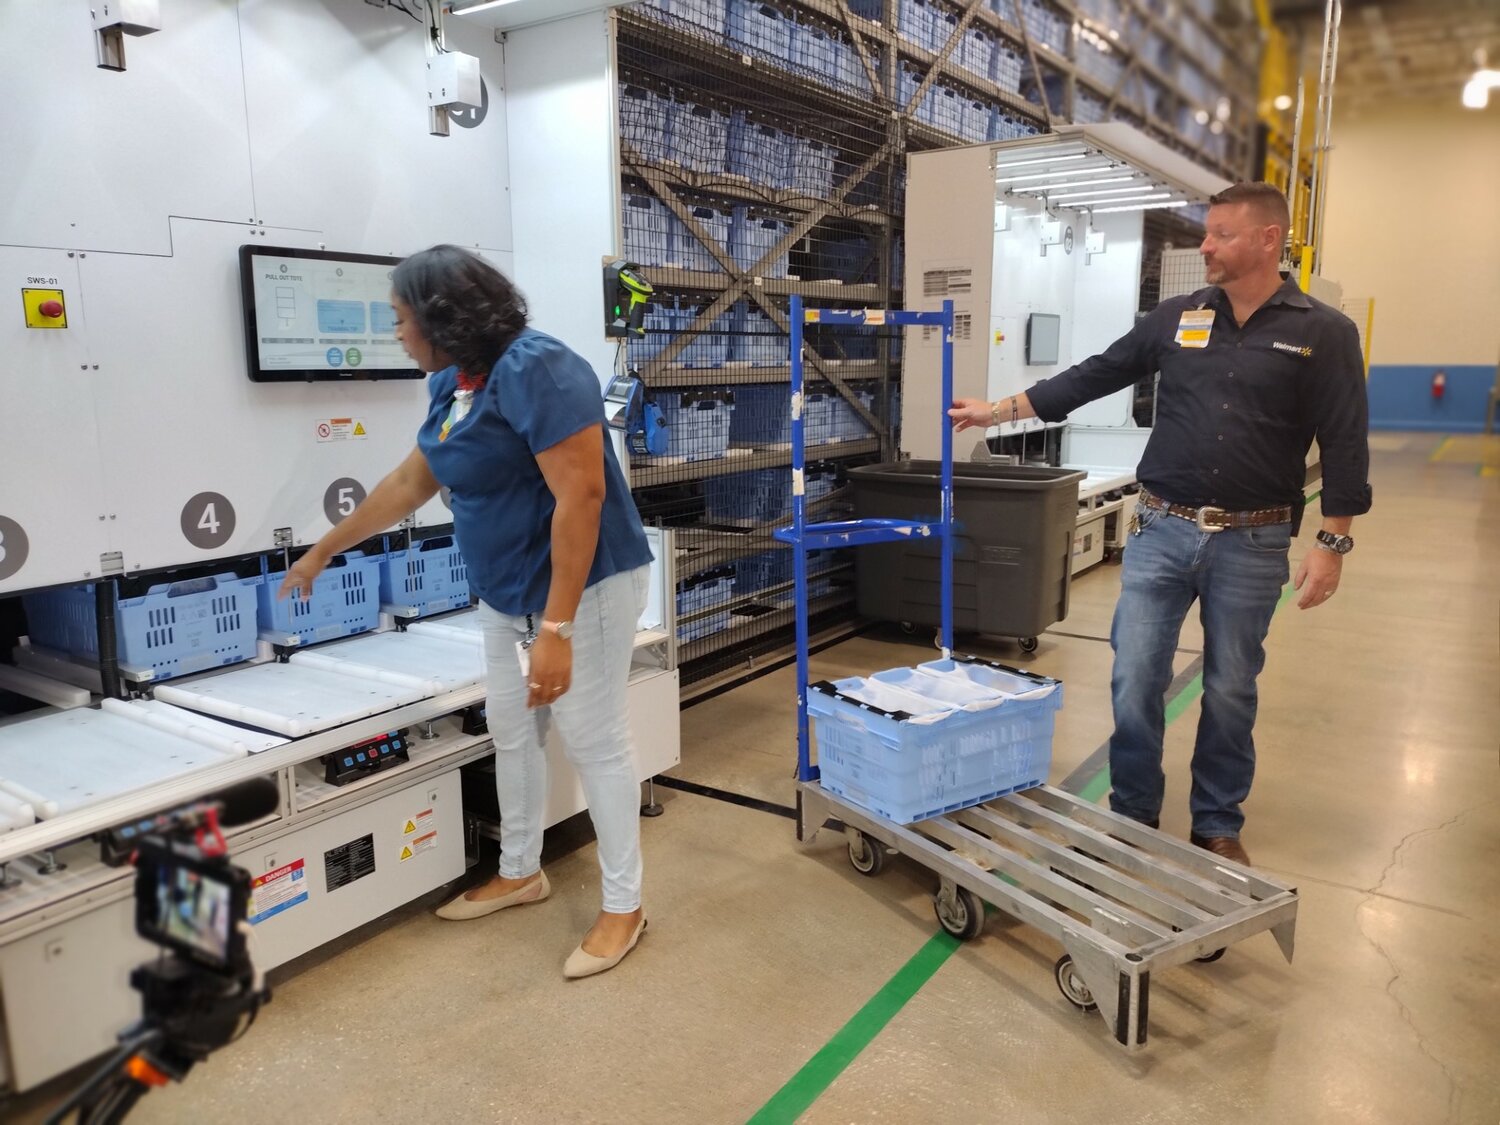 Walmart team lead Anna Mearidy (left) and store manager Robert Smith demonstrate how a customer order is fulfilled after robots bring the requested items to the Static Work Station at Walmart’s fulfillment center at 25108 Market Place Drive in Katy.